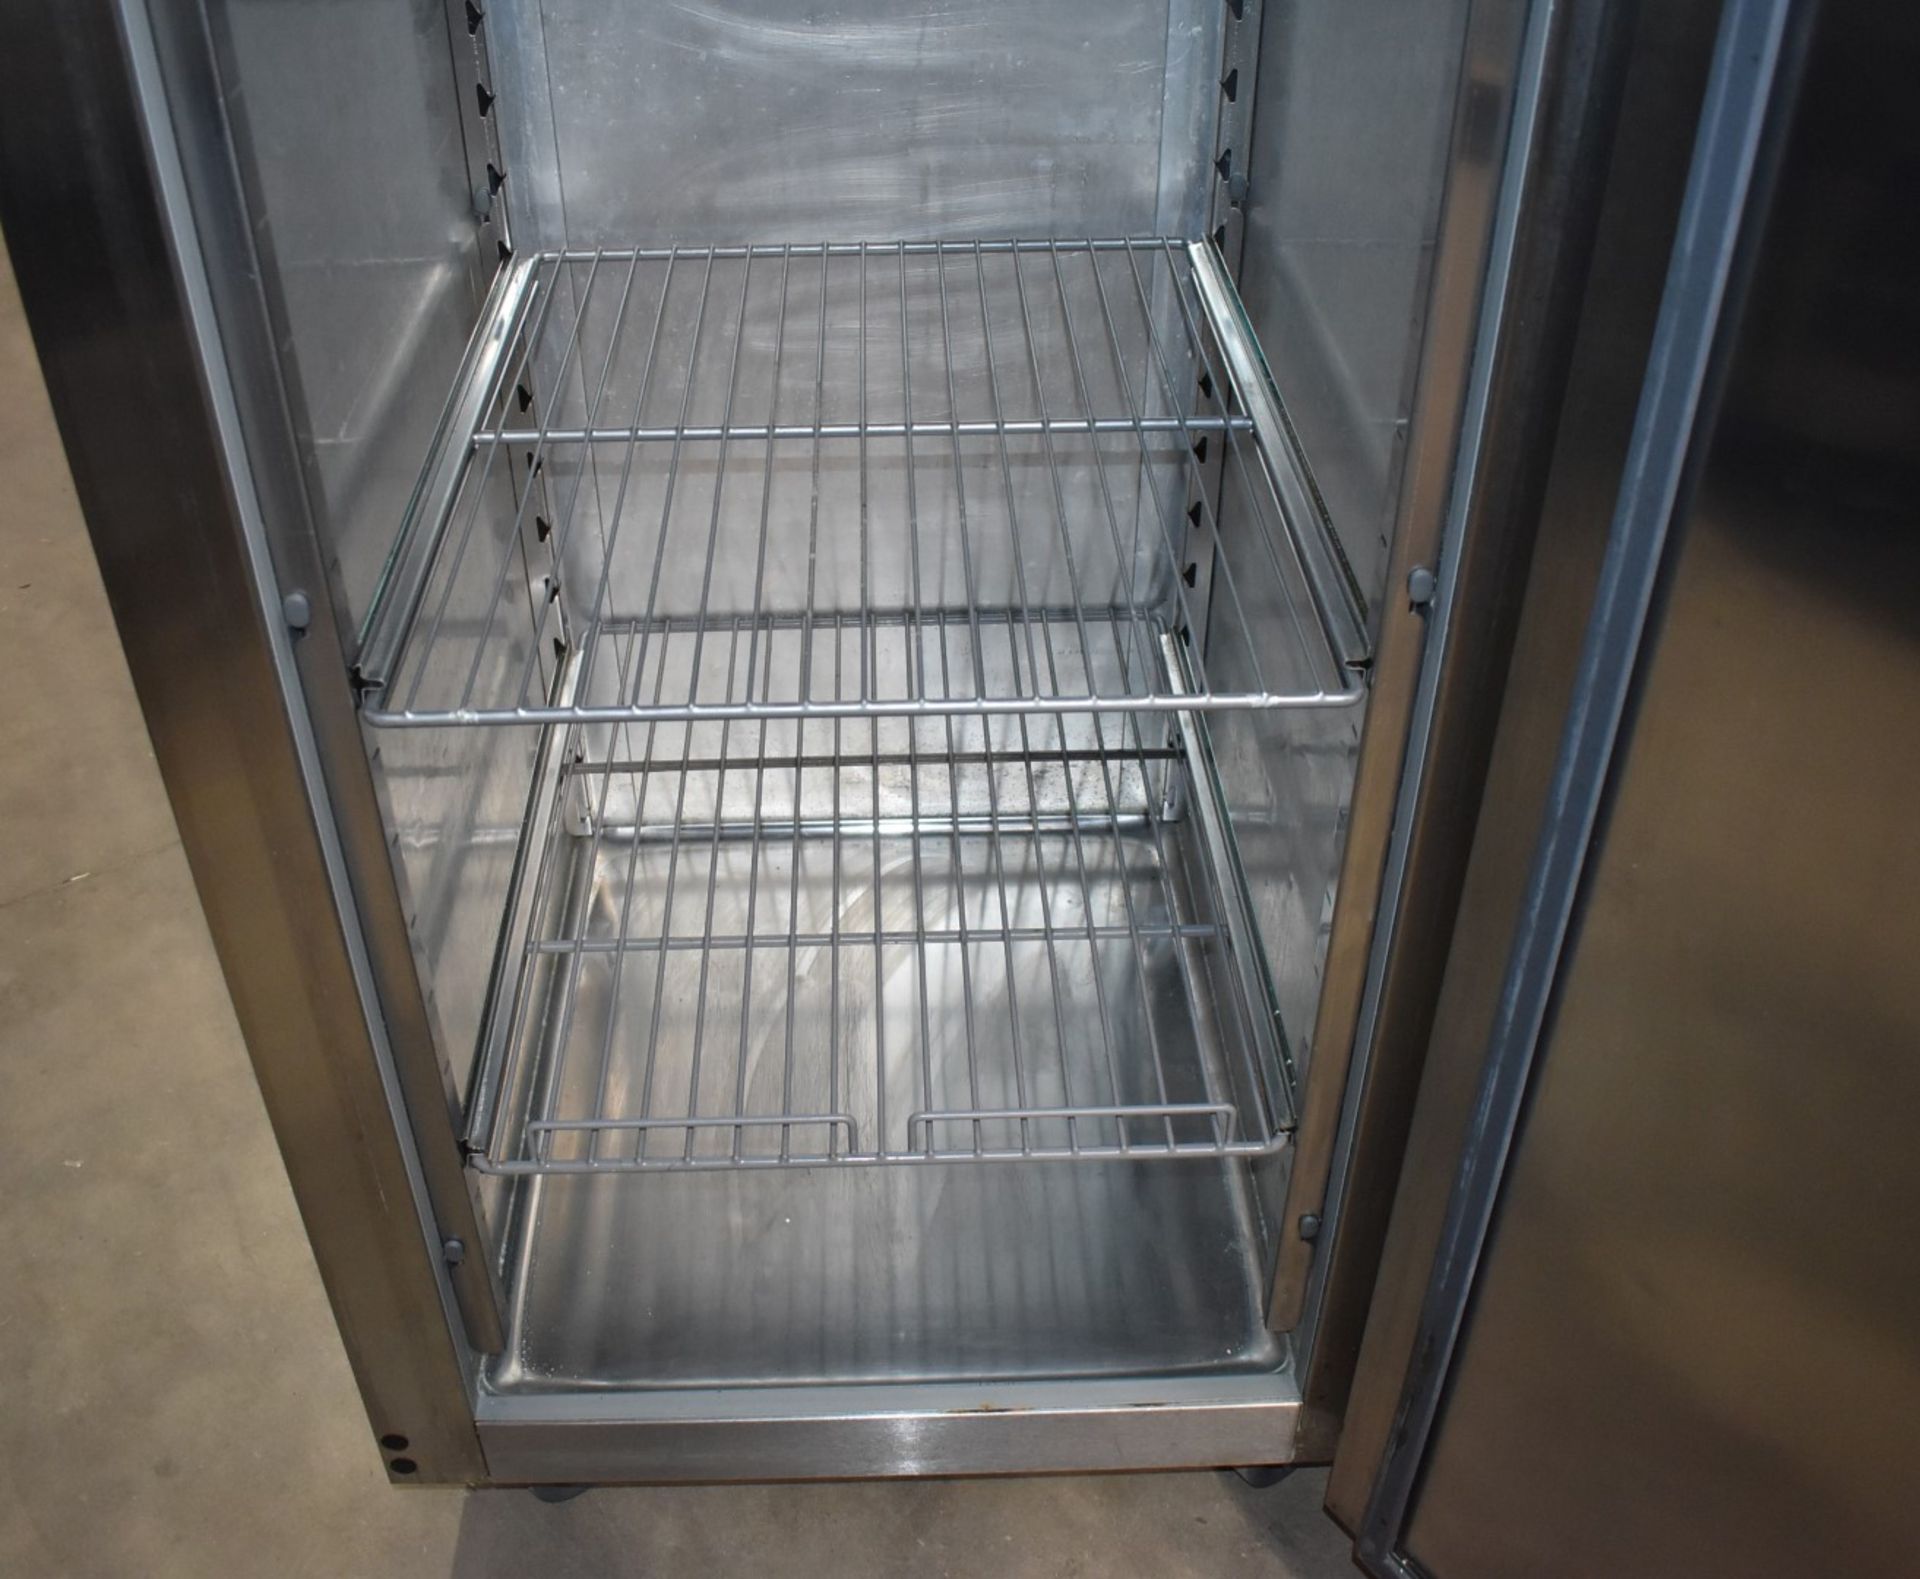 1 x Williams Upright Single Door Refrigerator With Stainless Steel Exterior - Model HS1SA - Recently - Image 4 of 12